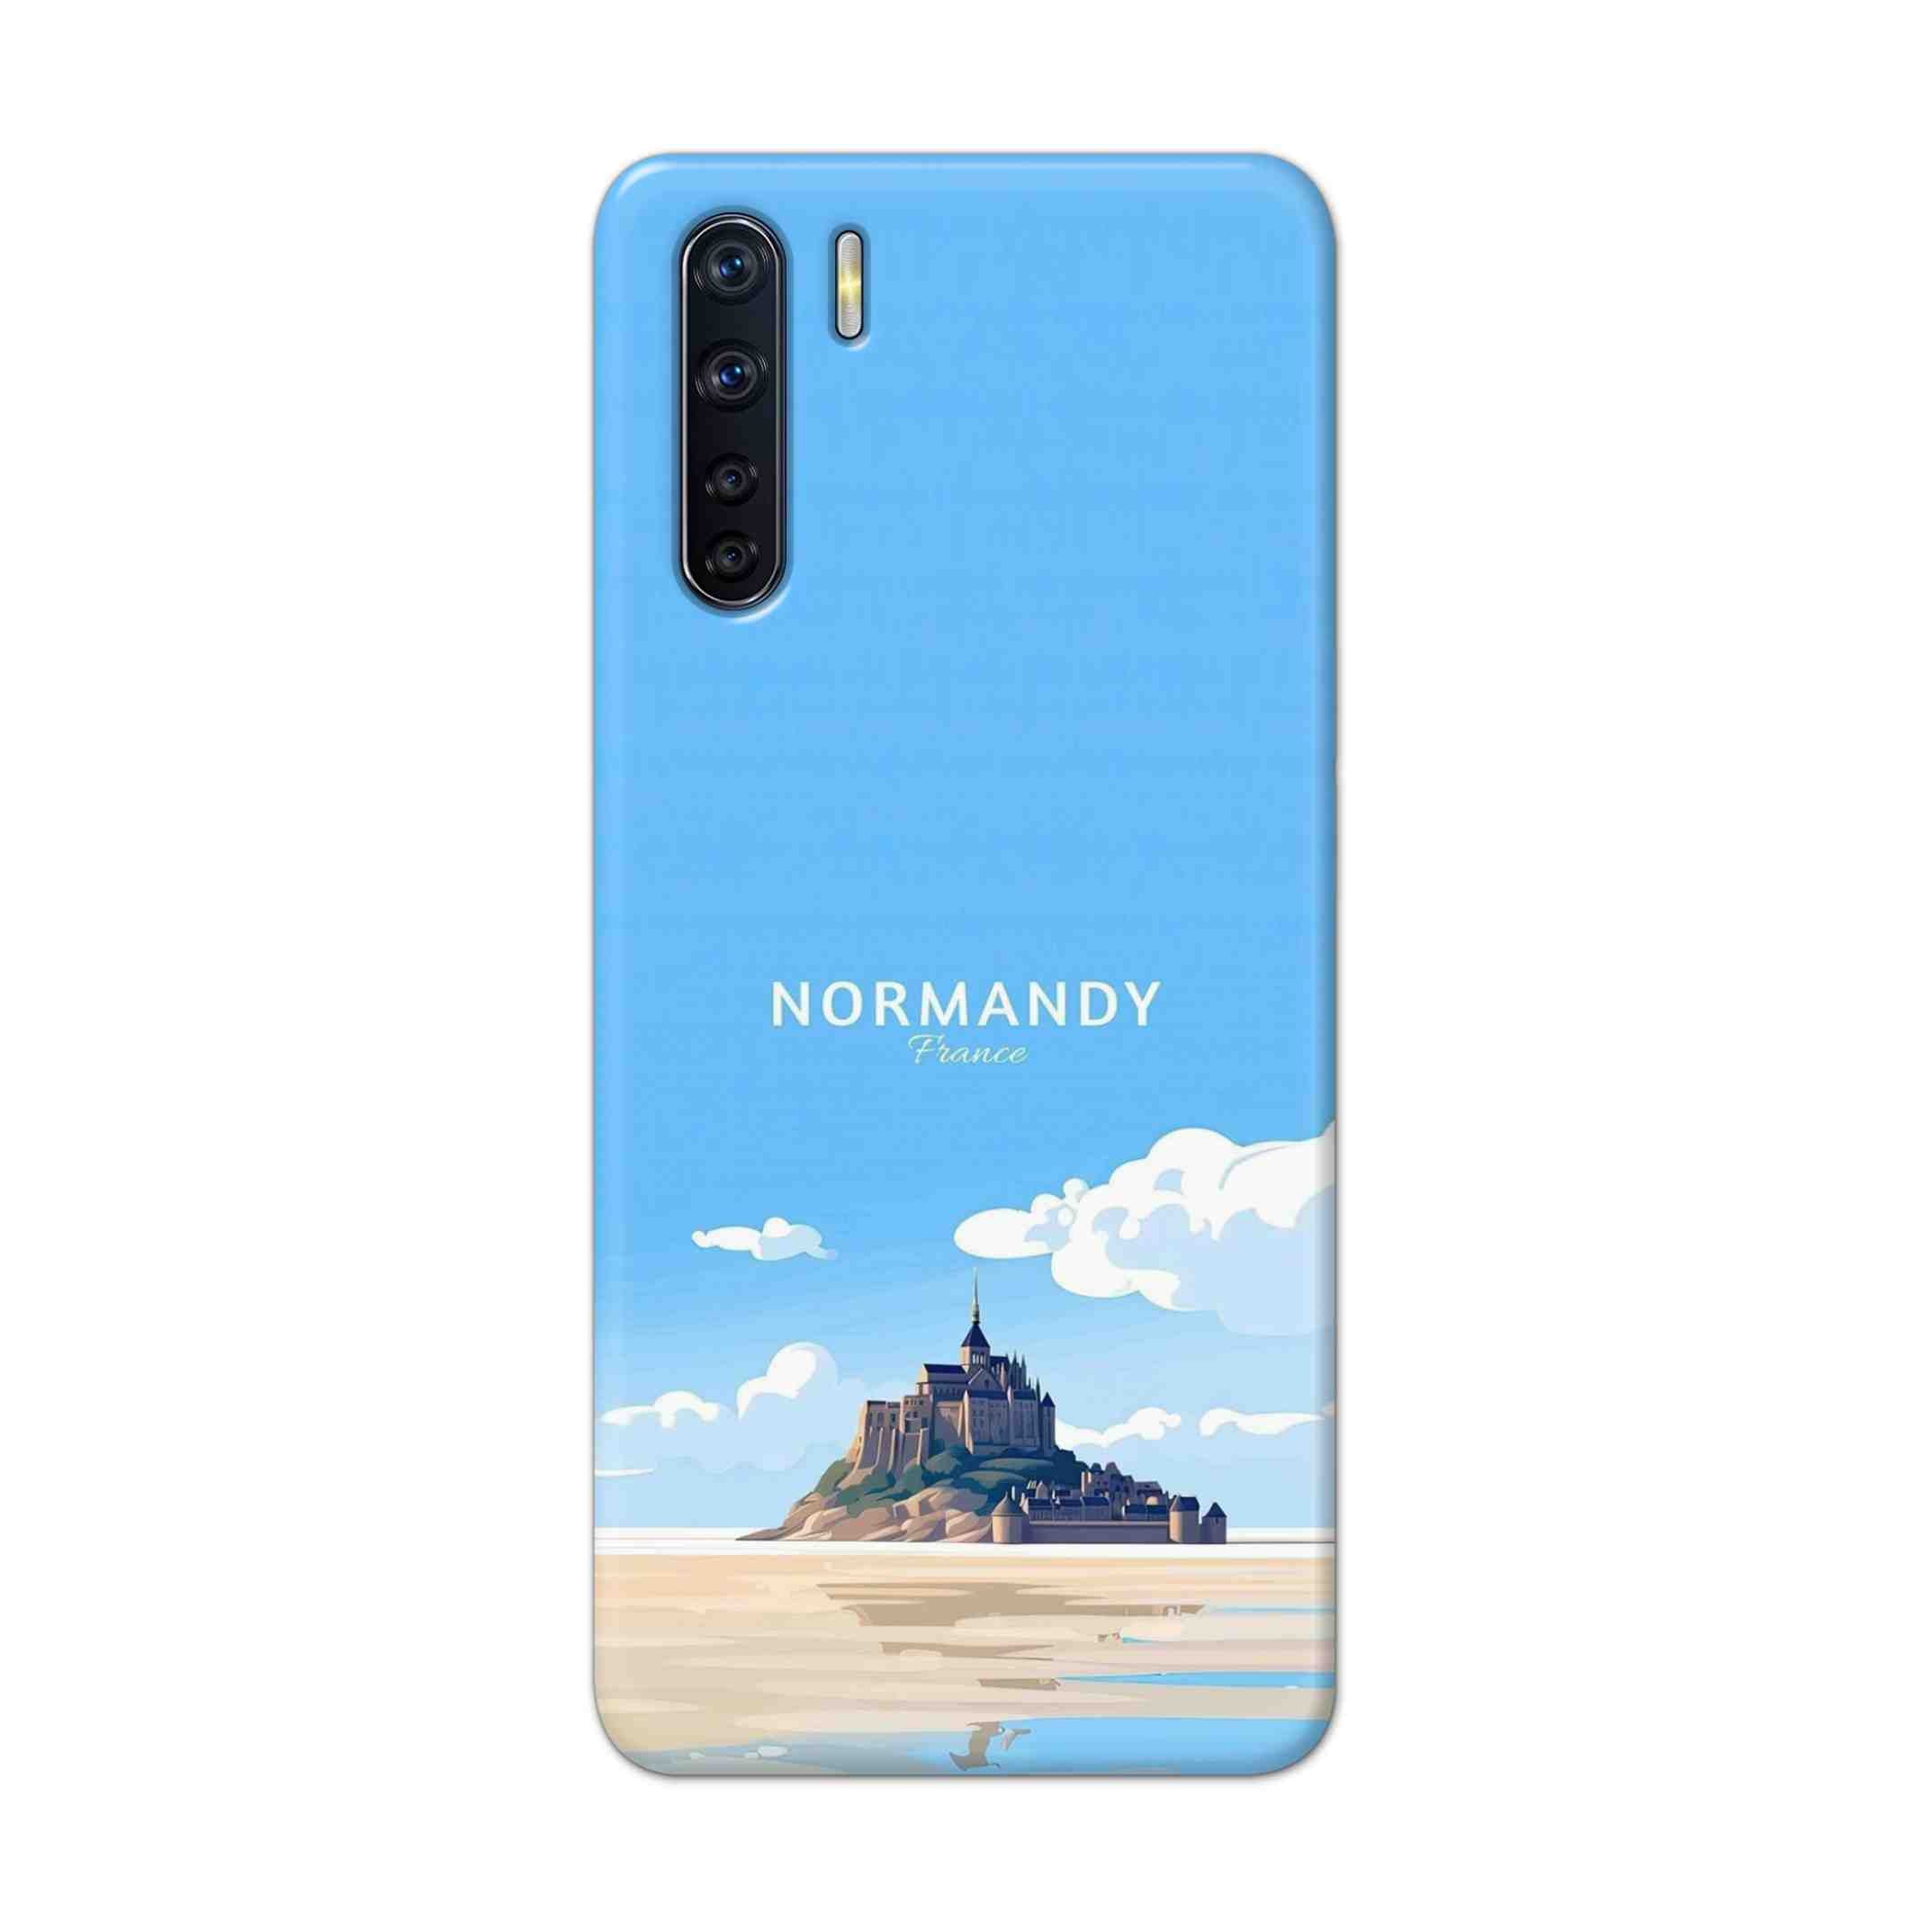 Buy Normandy Hard Back Mobile Phone Case Cover For OPPO F15 Online